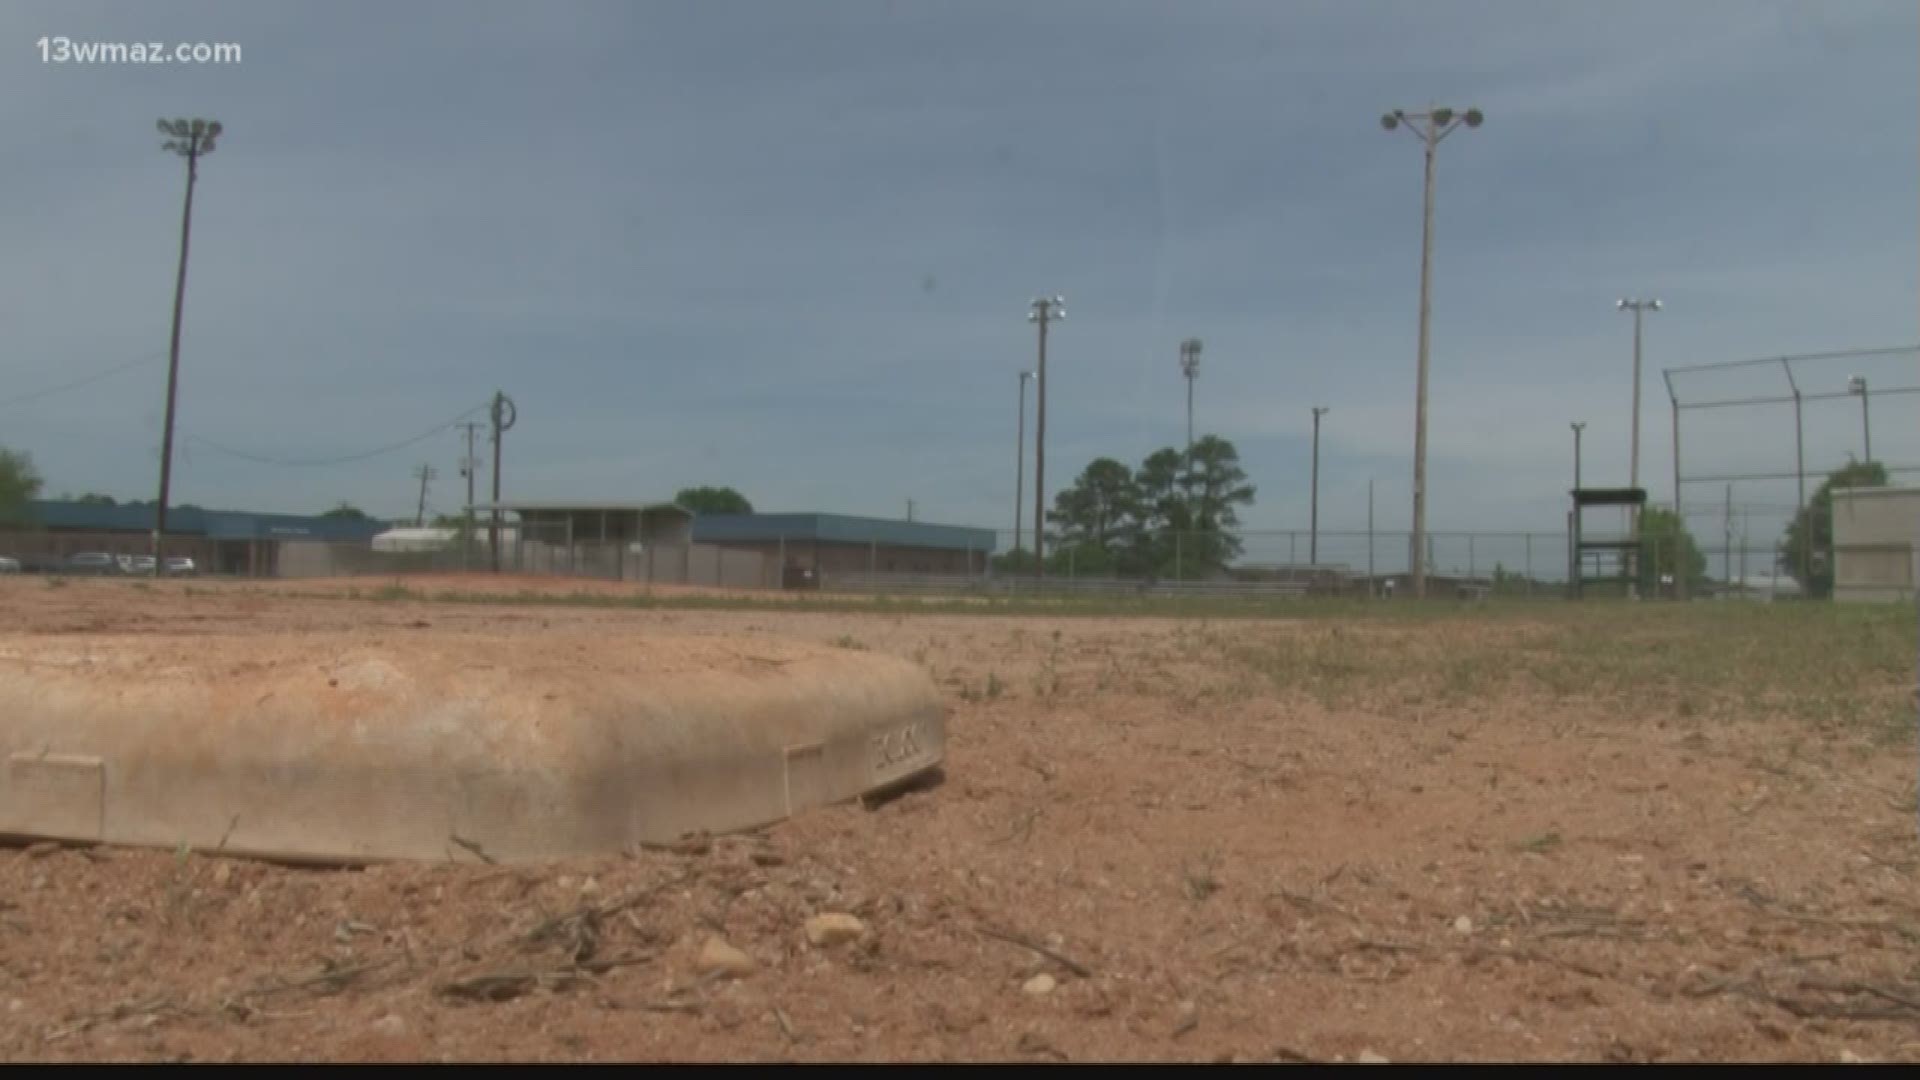 An affordable housing development could be coming to Warner Robins' Perkins Field. Thursday night, city council heard feedback from residents on the idea.